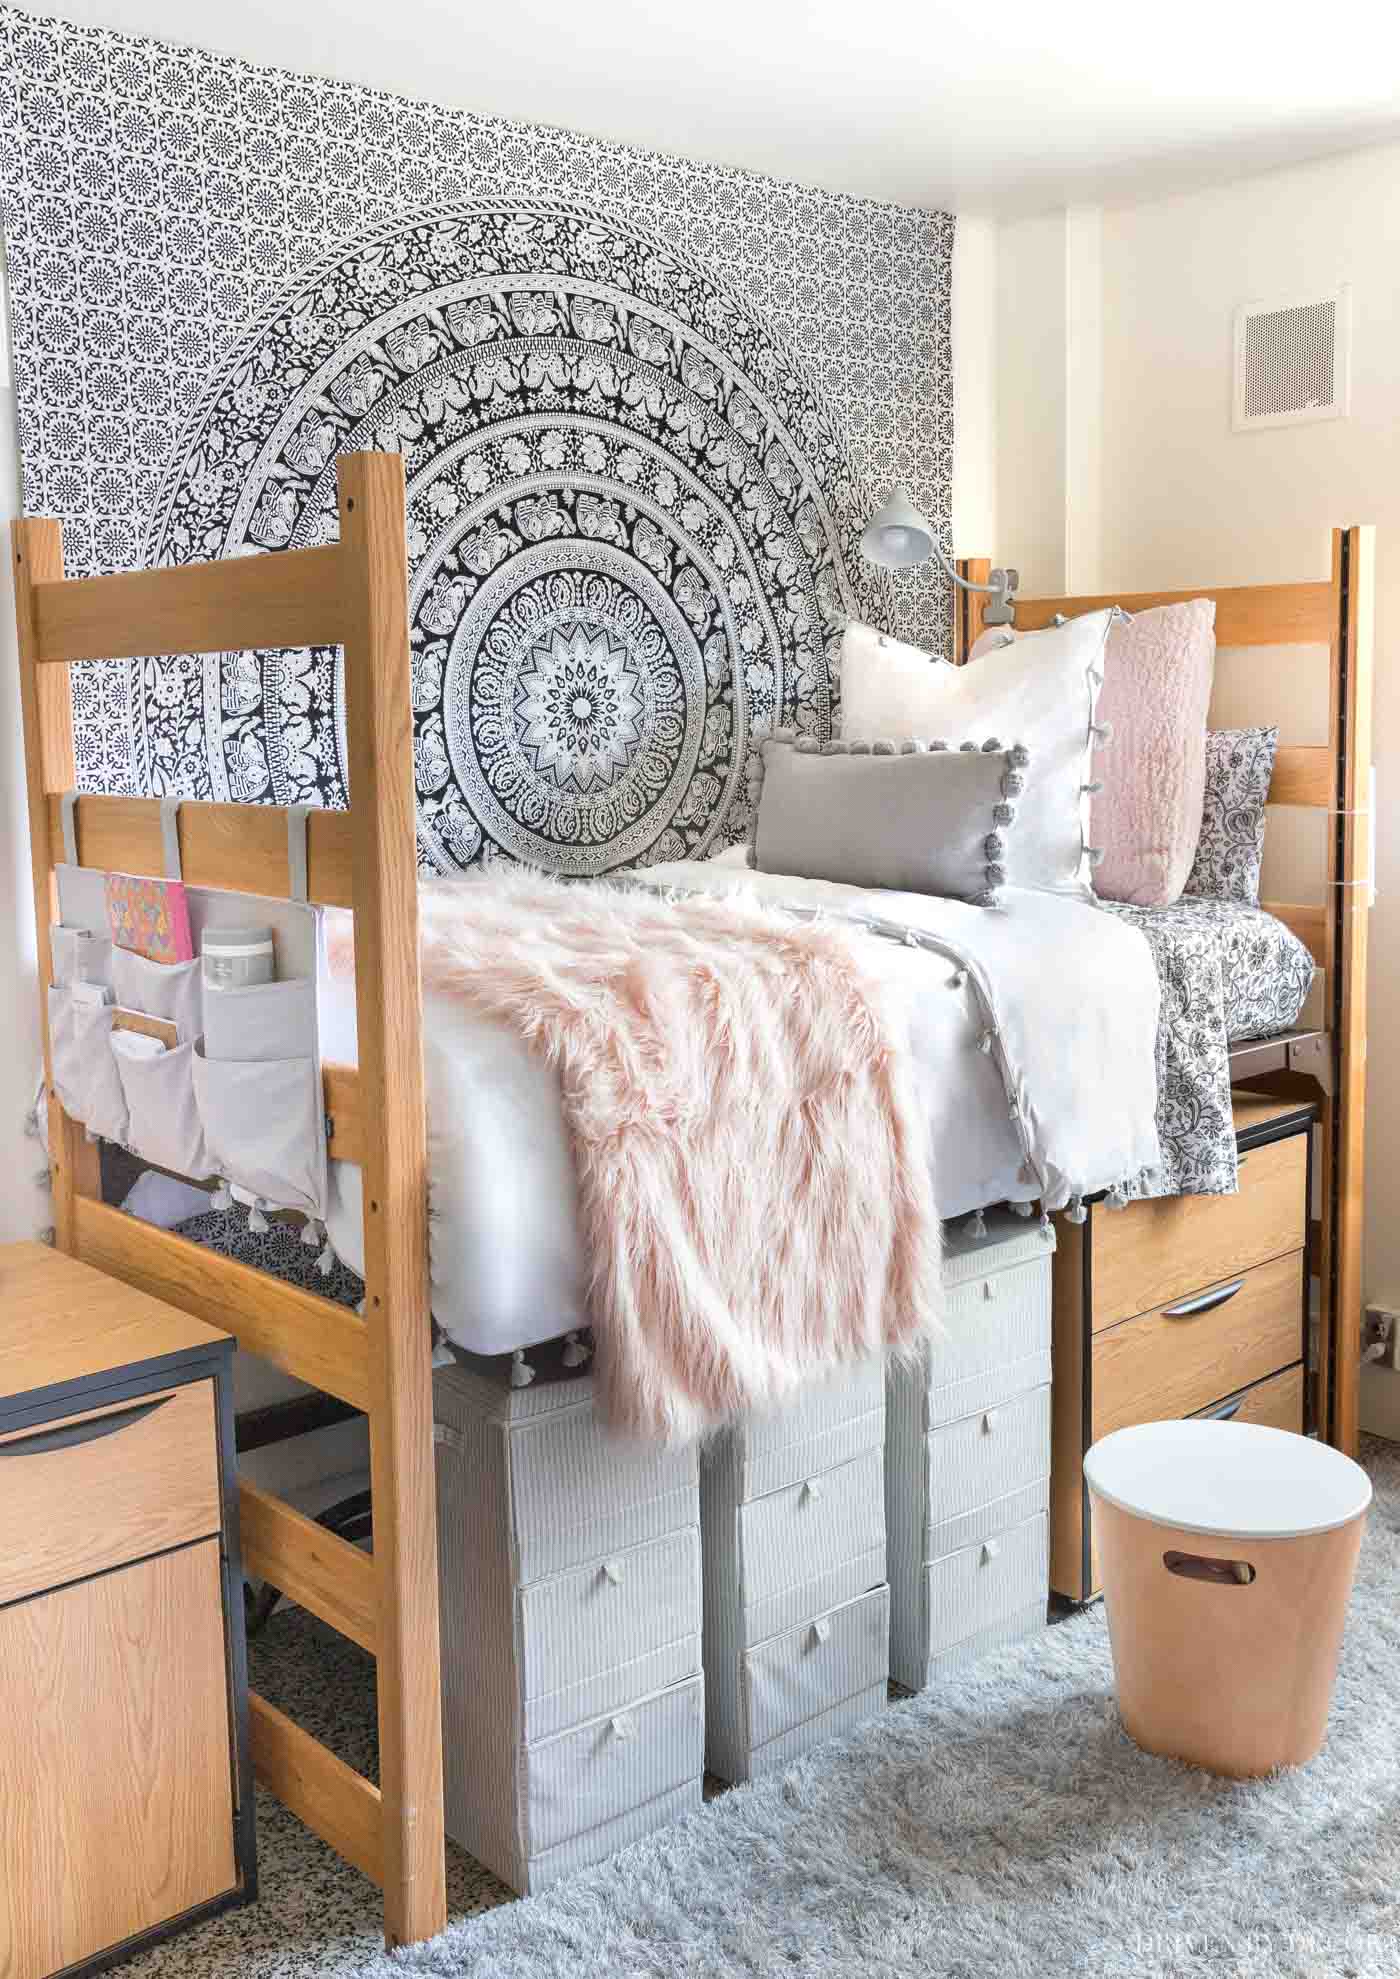 10 Dorm Room Ideas for a Personalized HomeAwayfromHome